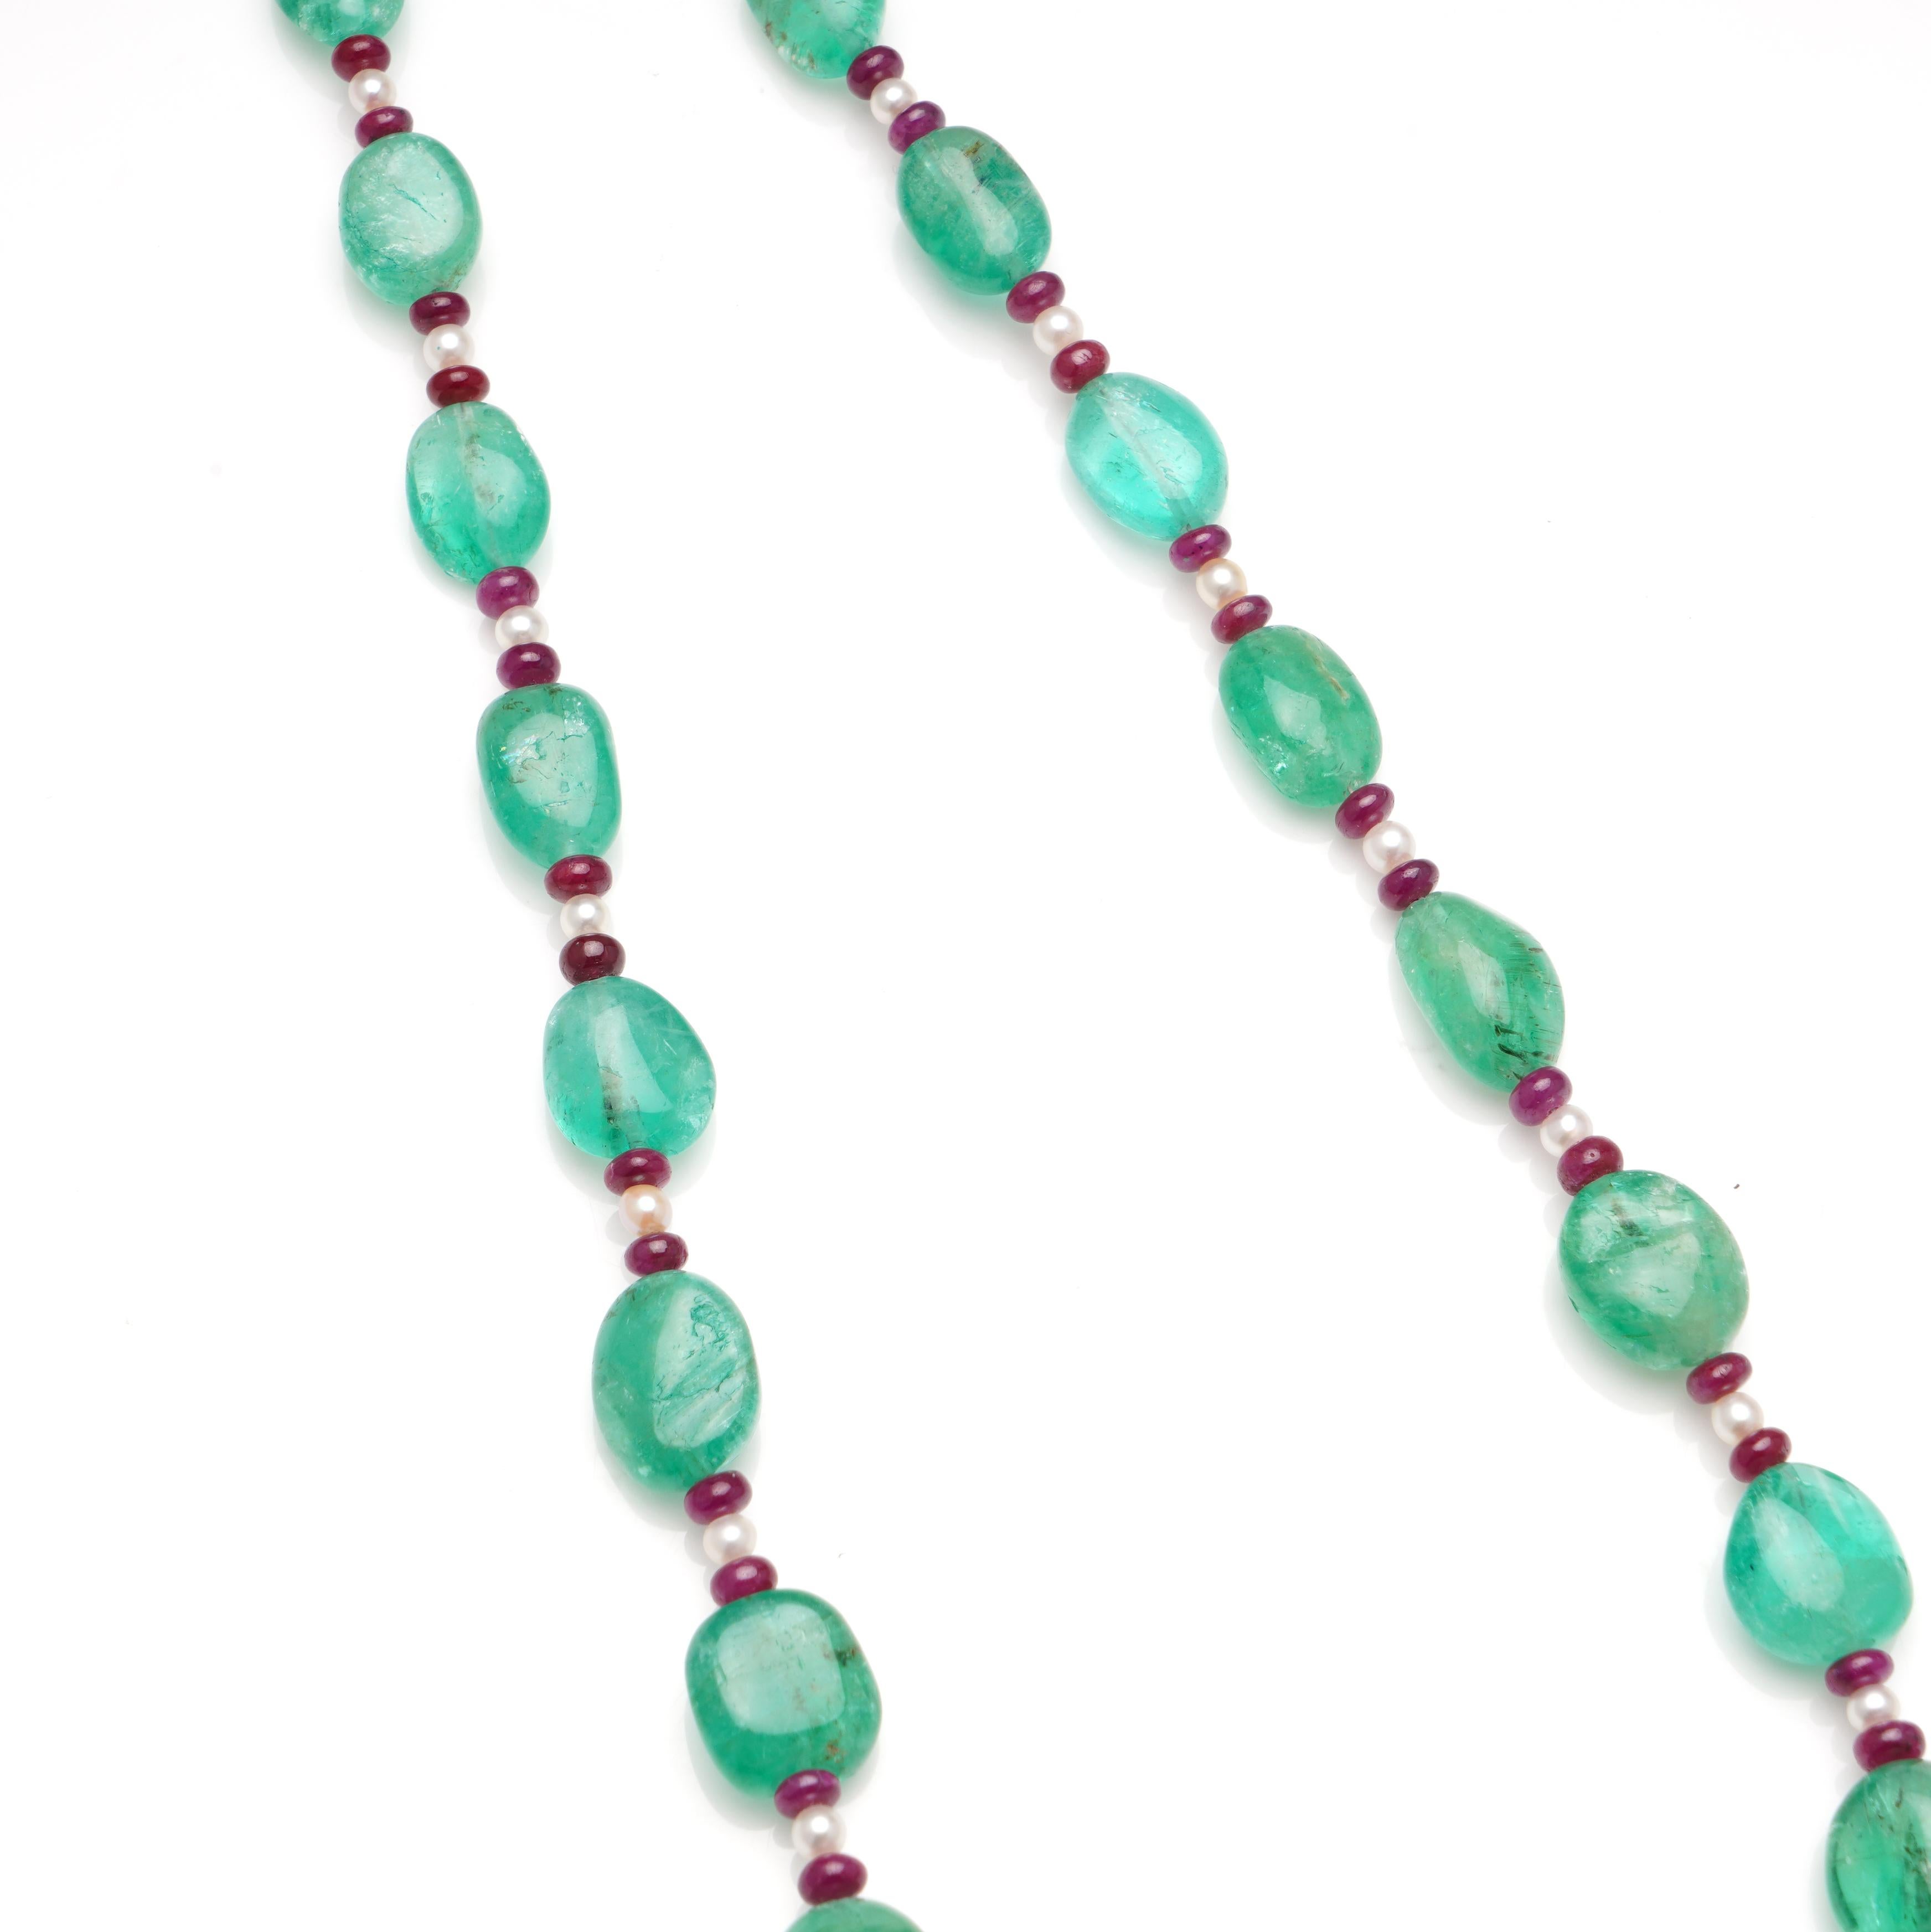 Emerald Cut Bead Necklace with Emeralds, Rubellites and Seed Pearls. For Sale